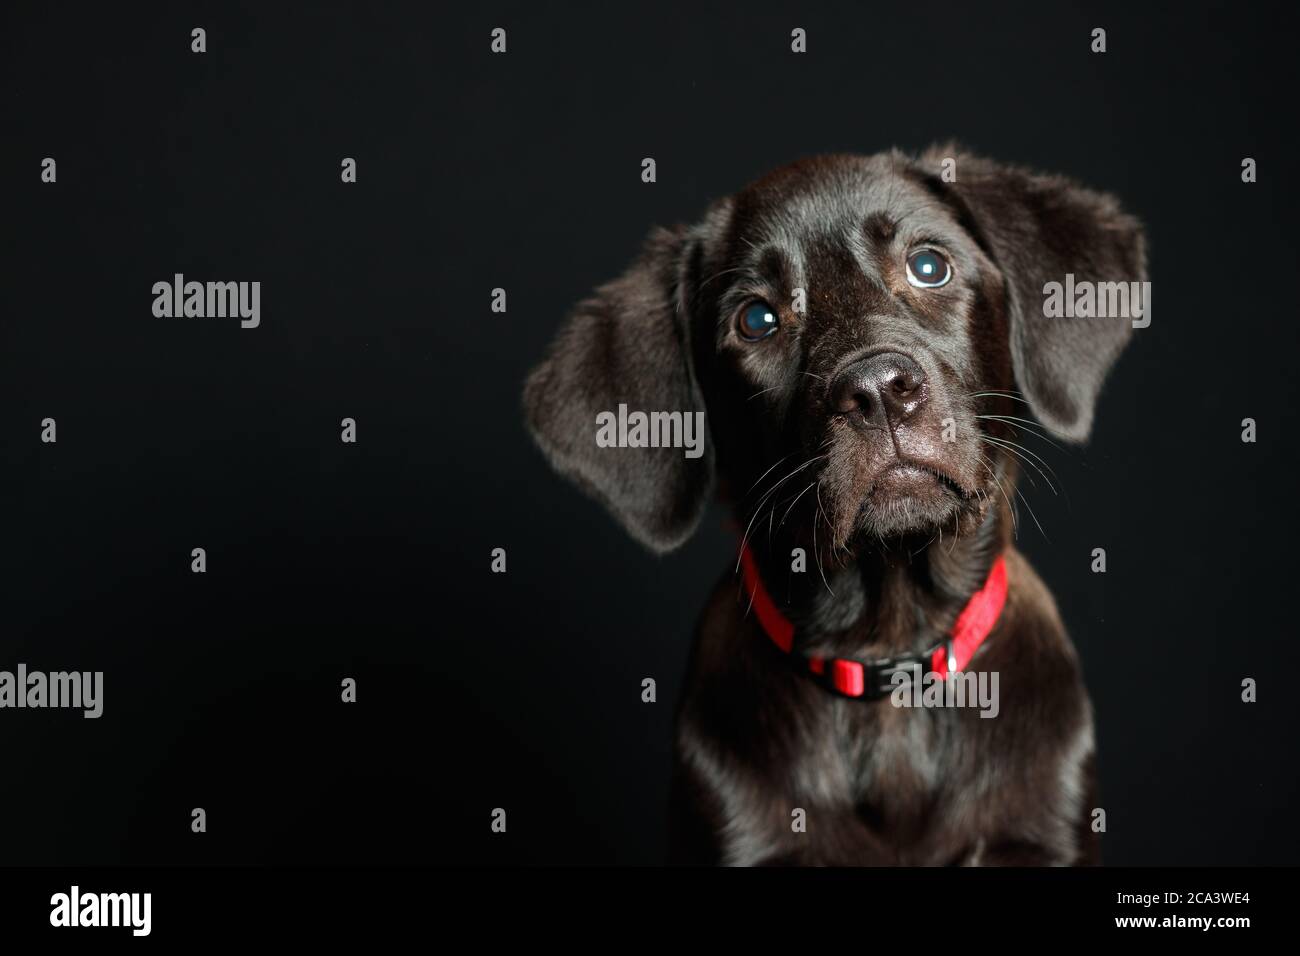 Labrador puppy in studio lighting and dark background with red collar Stock Photo